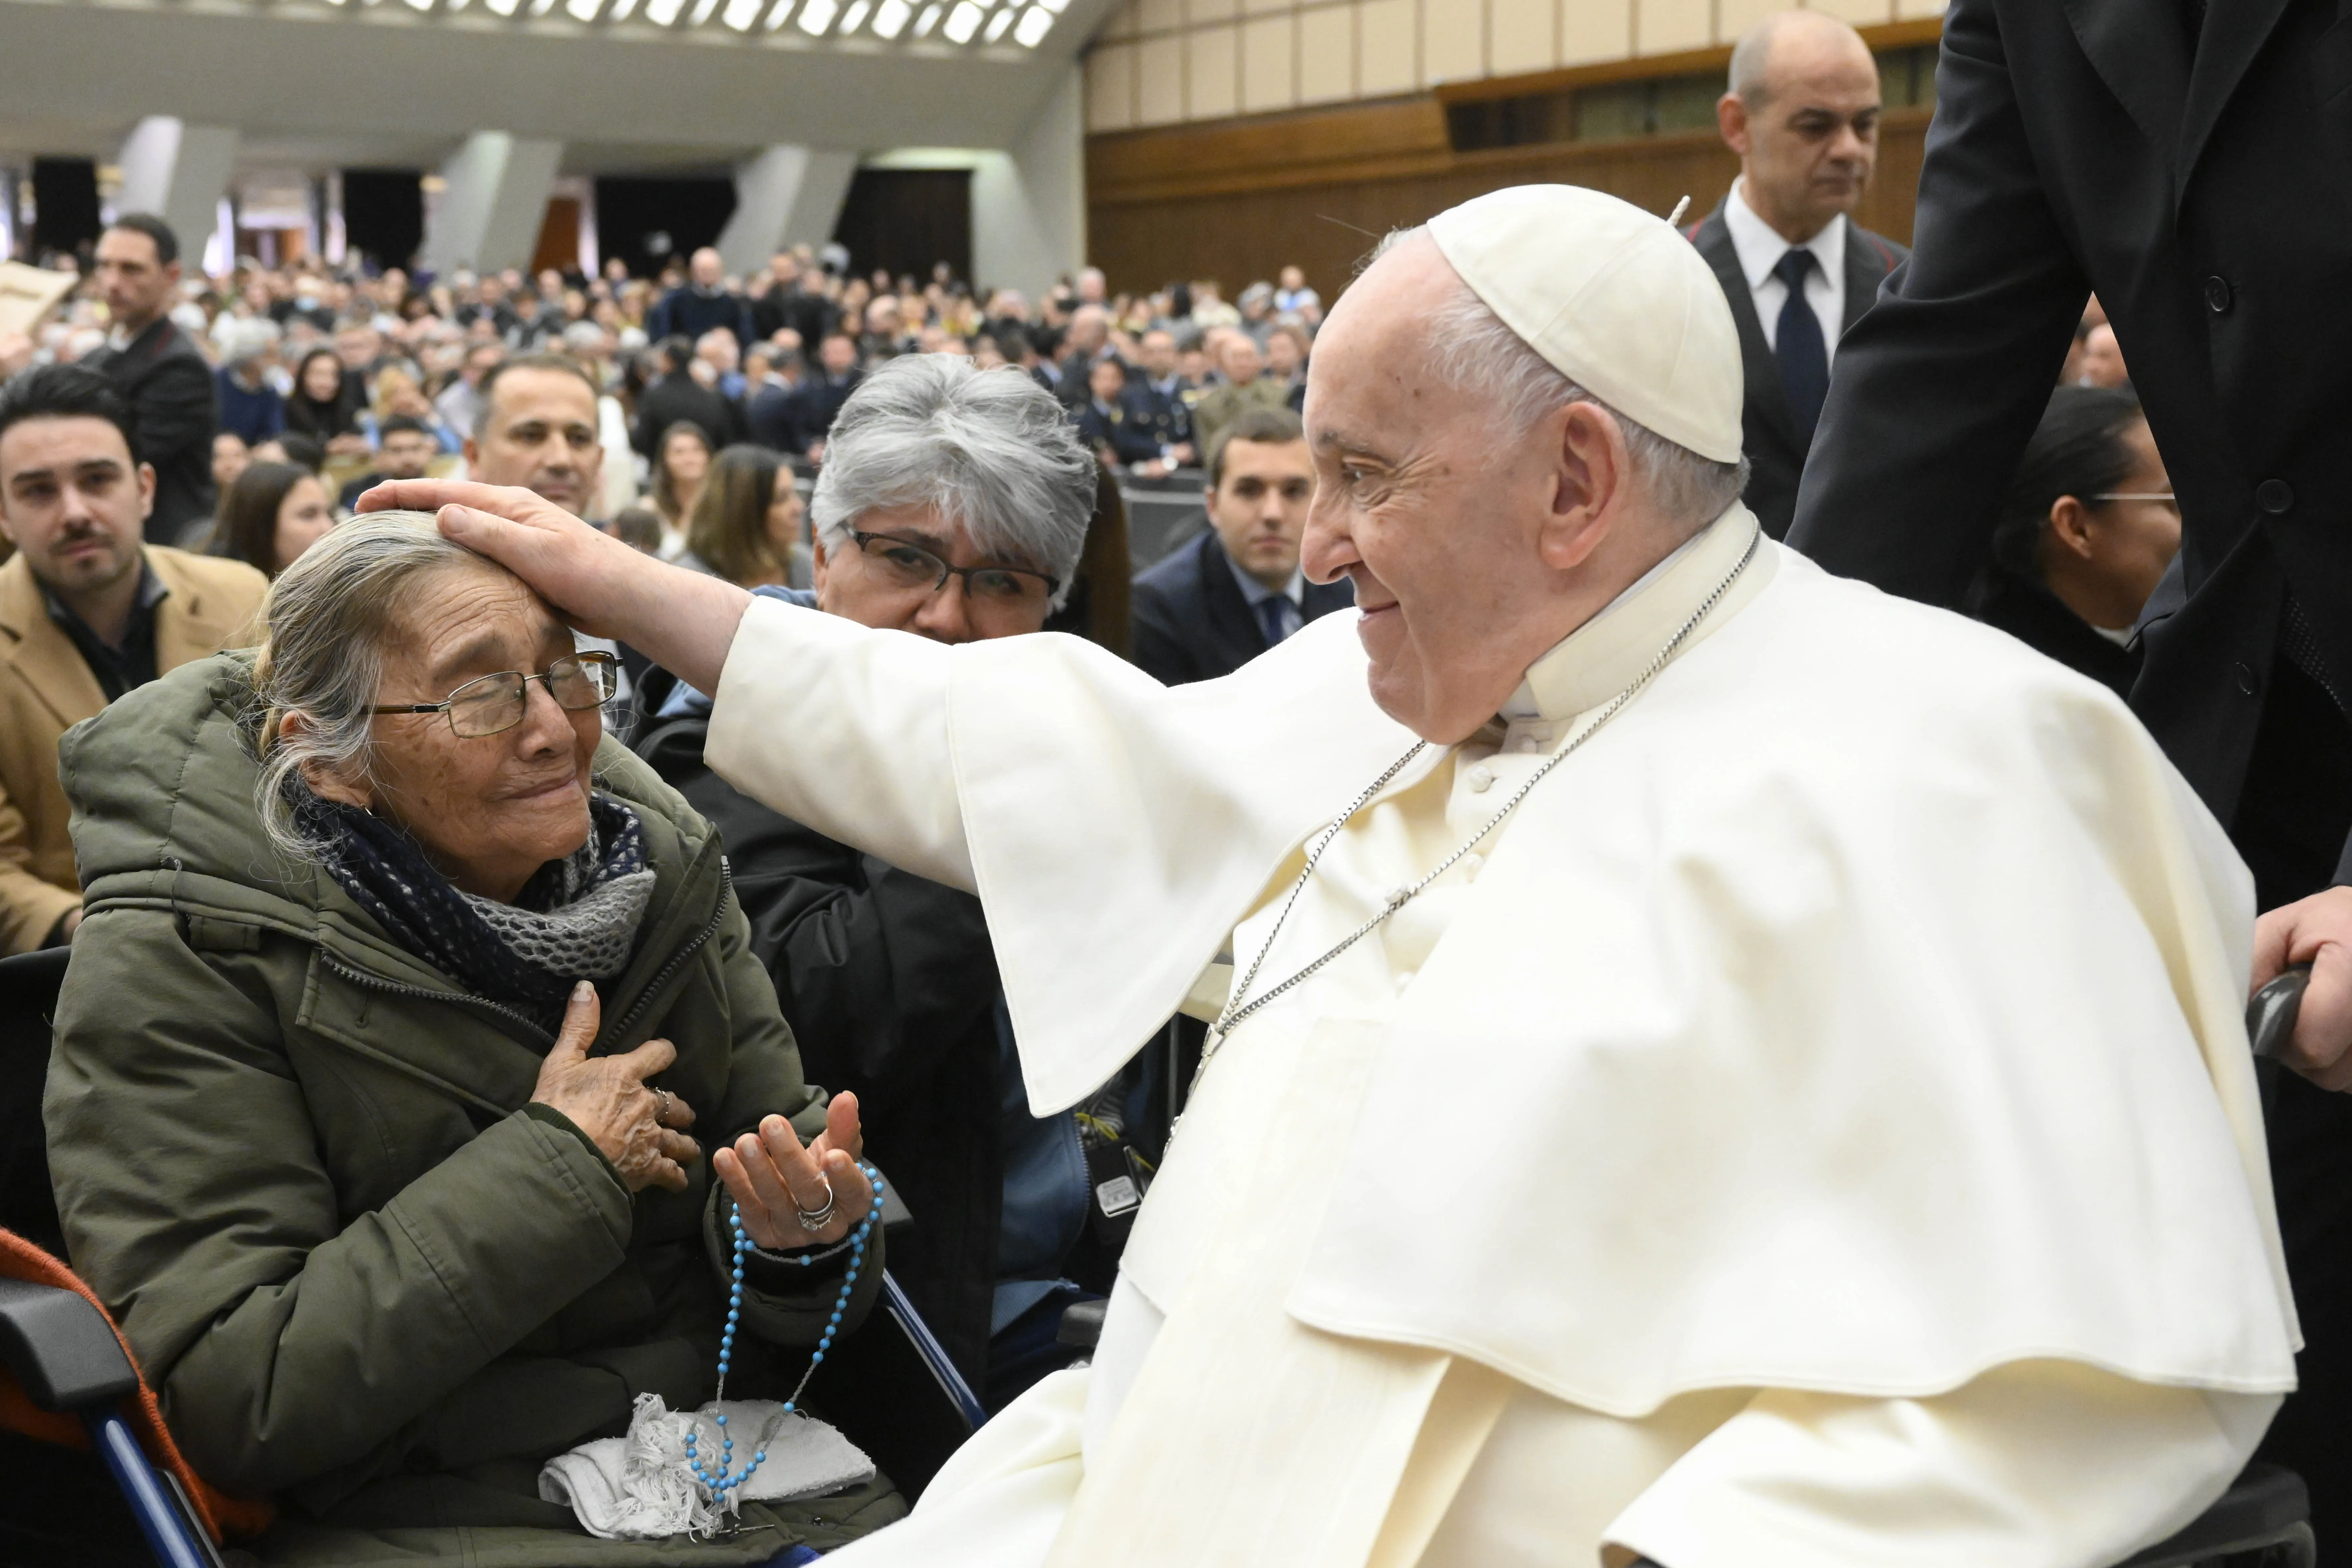 Pope Francis greets pilgrims at his general audience in Paul VI Hall on Feb. 15, 2023.?w=200&h=150